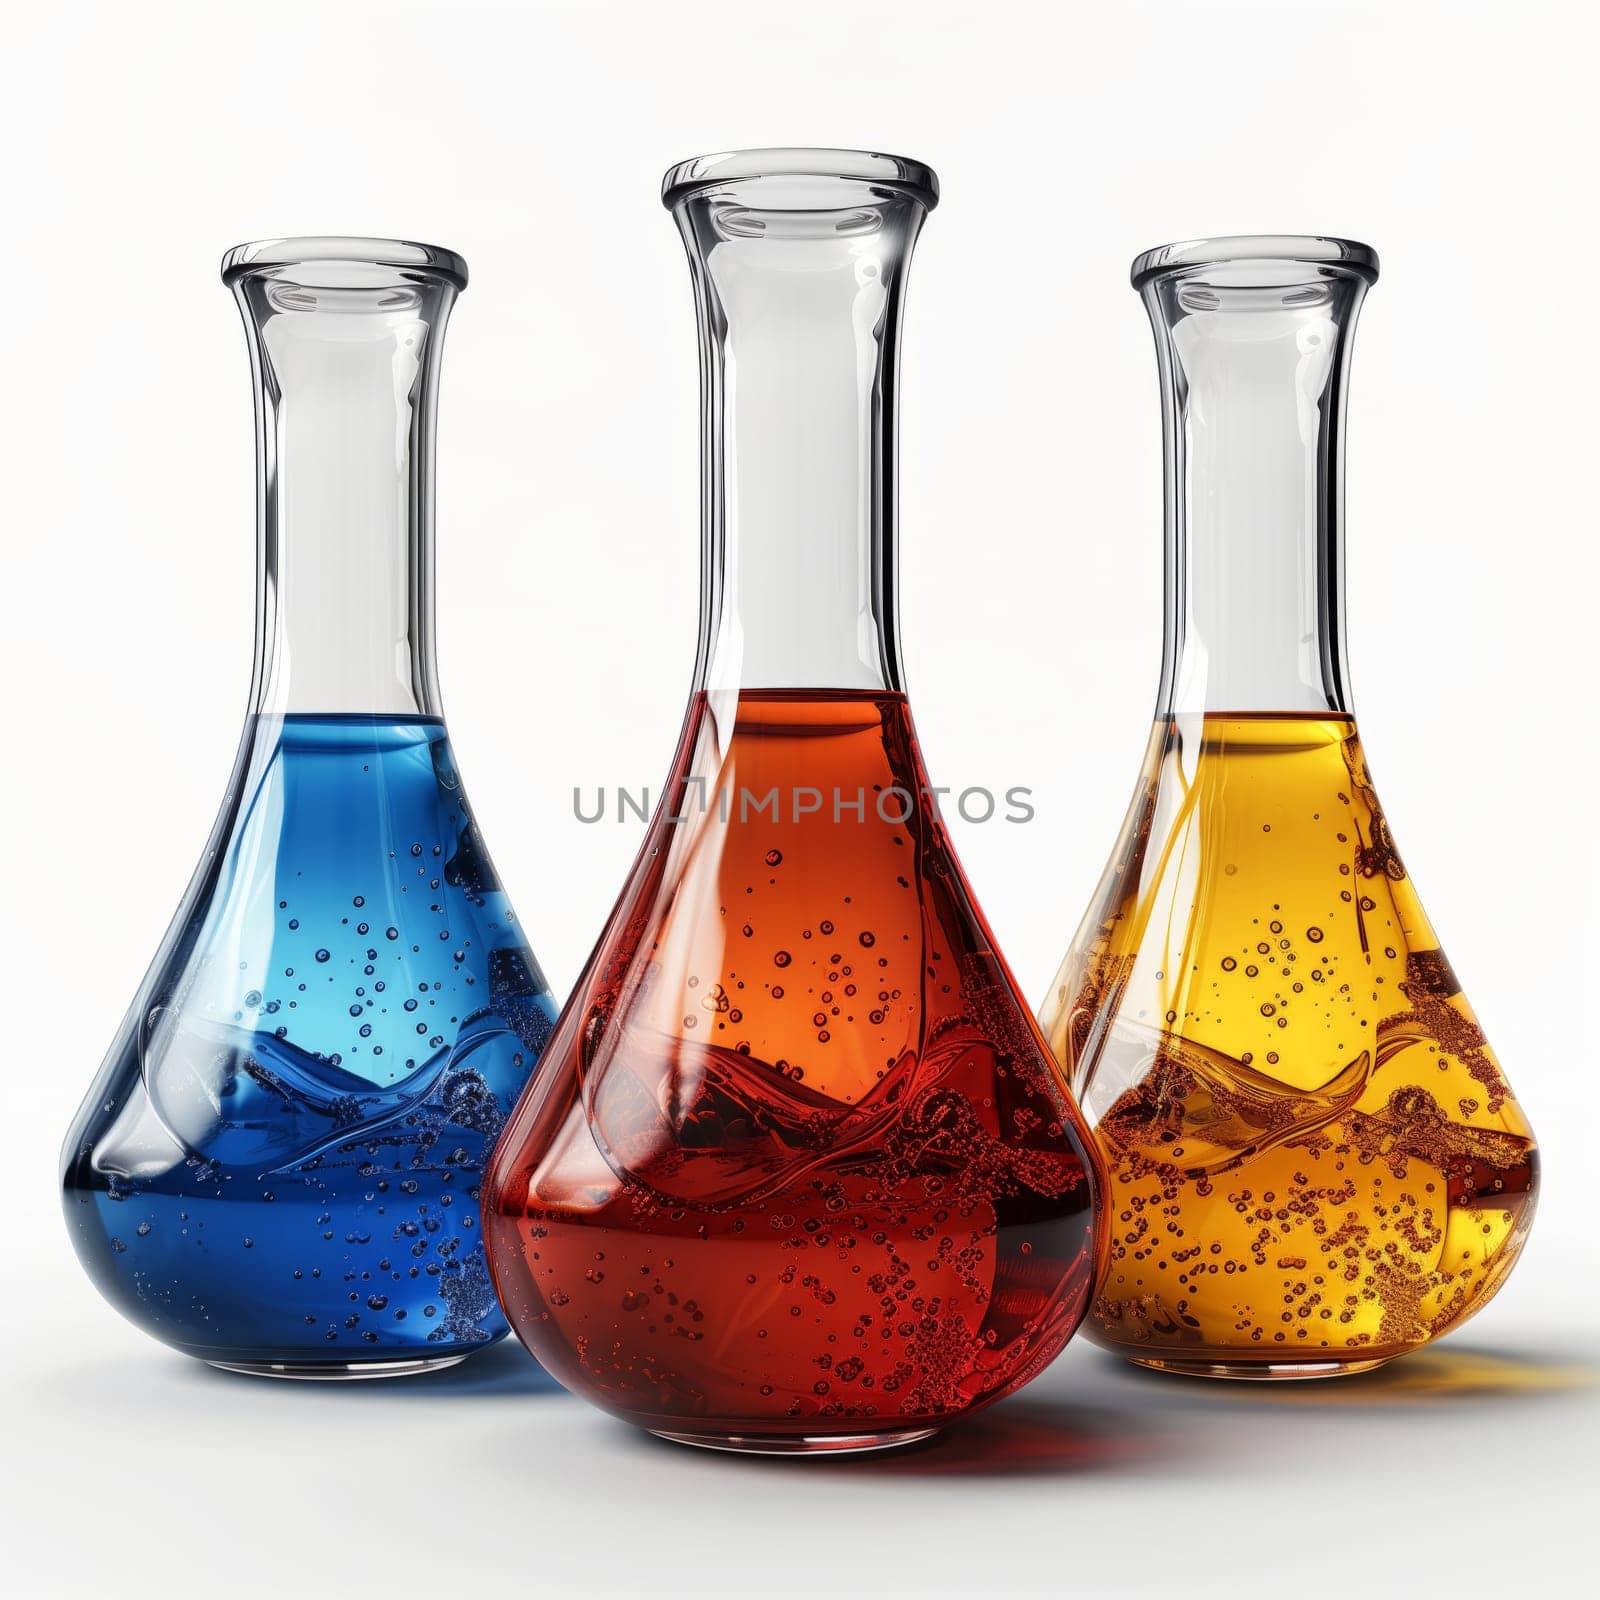 Three beakers filled with various colored liquids displayed on a plain white background, showcasing a creative blend of tableware and drinkware in an artistic composition